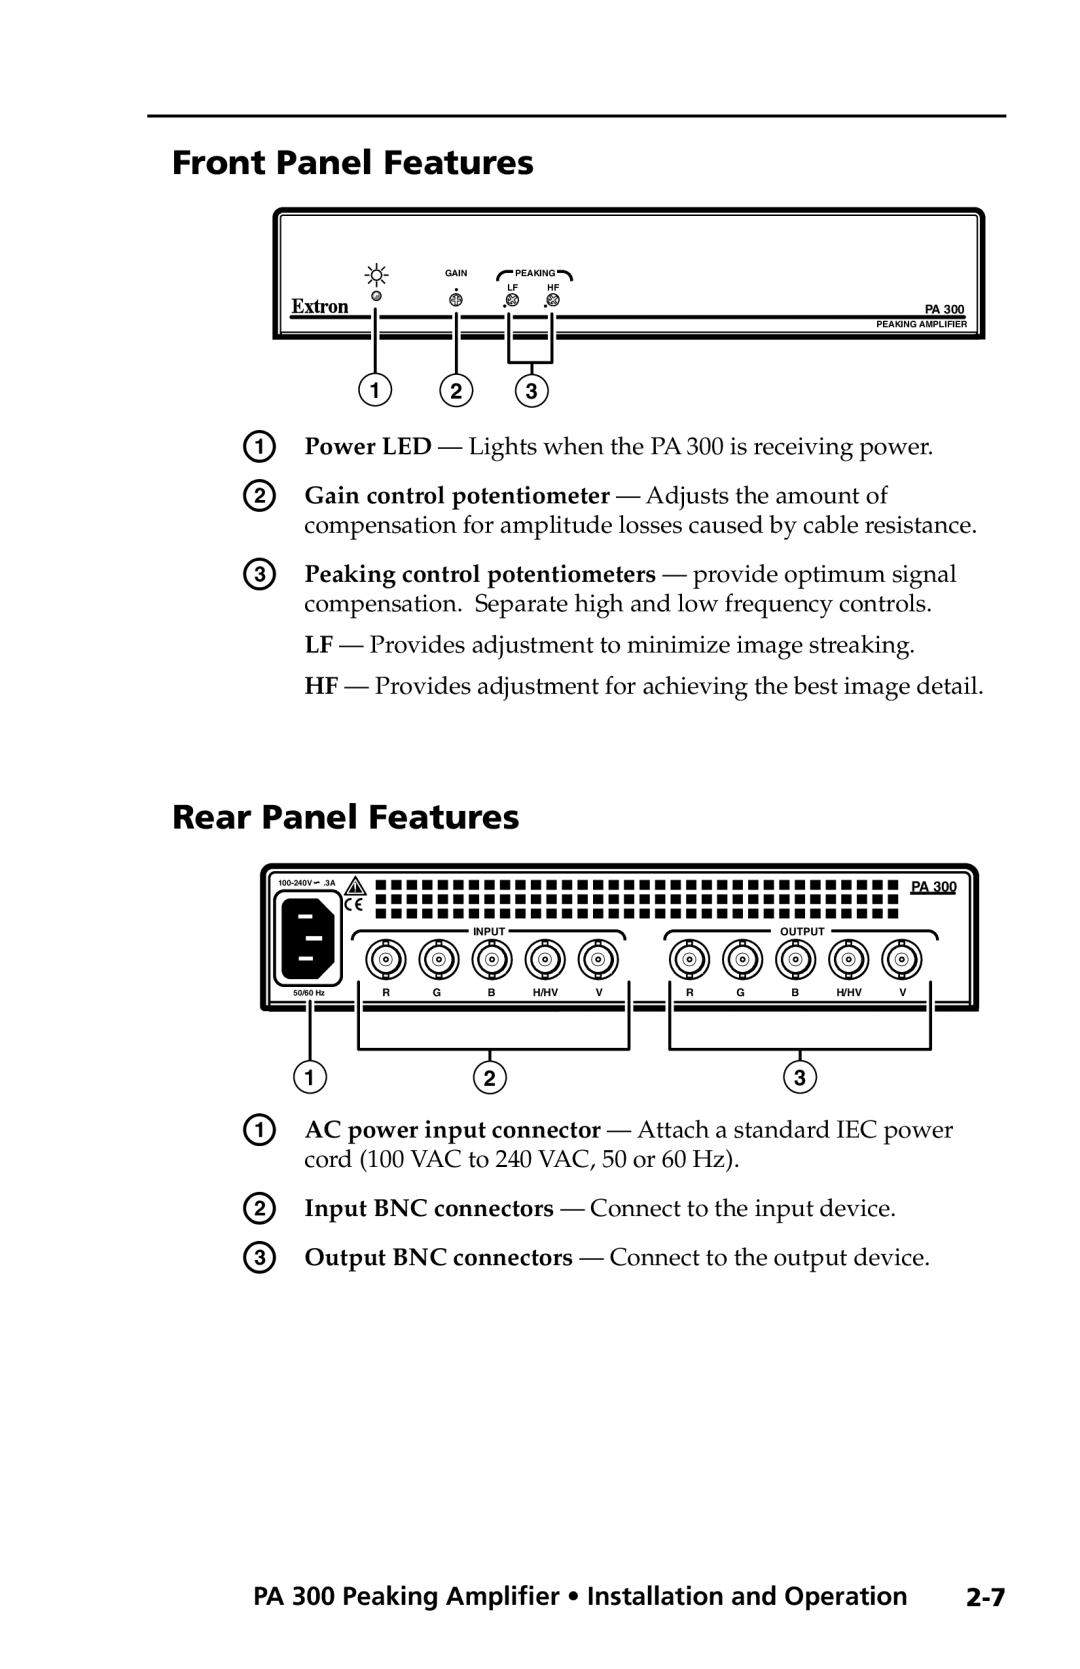 Extron electronic PA 300 user manual Front Panel Features, Rear Panel Features 